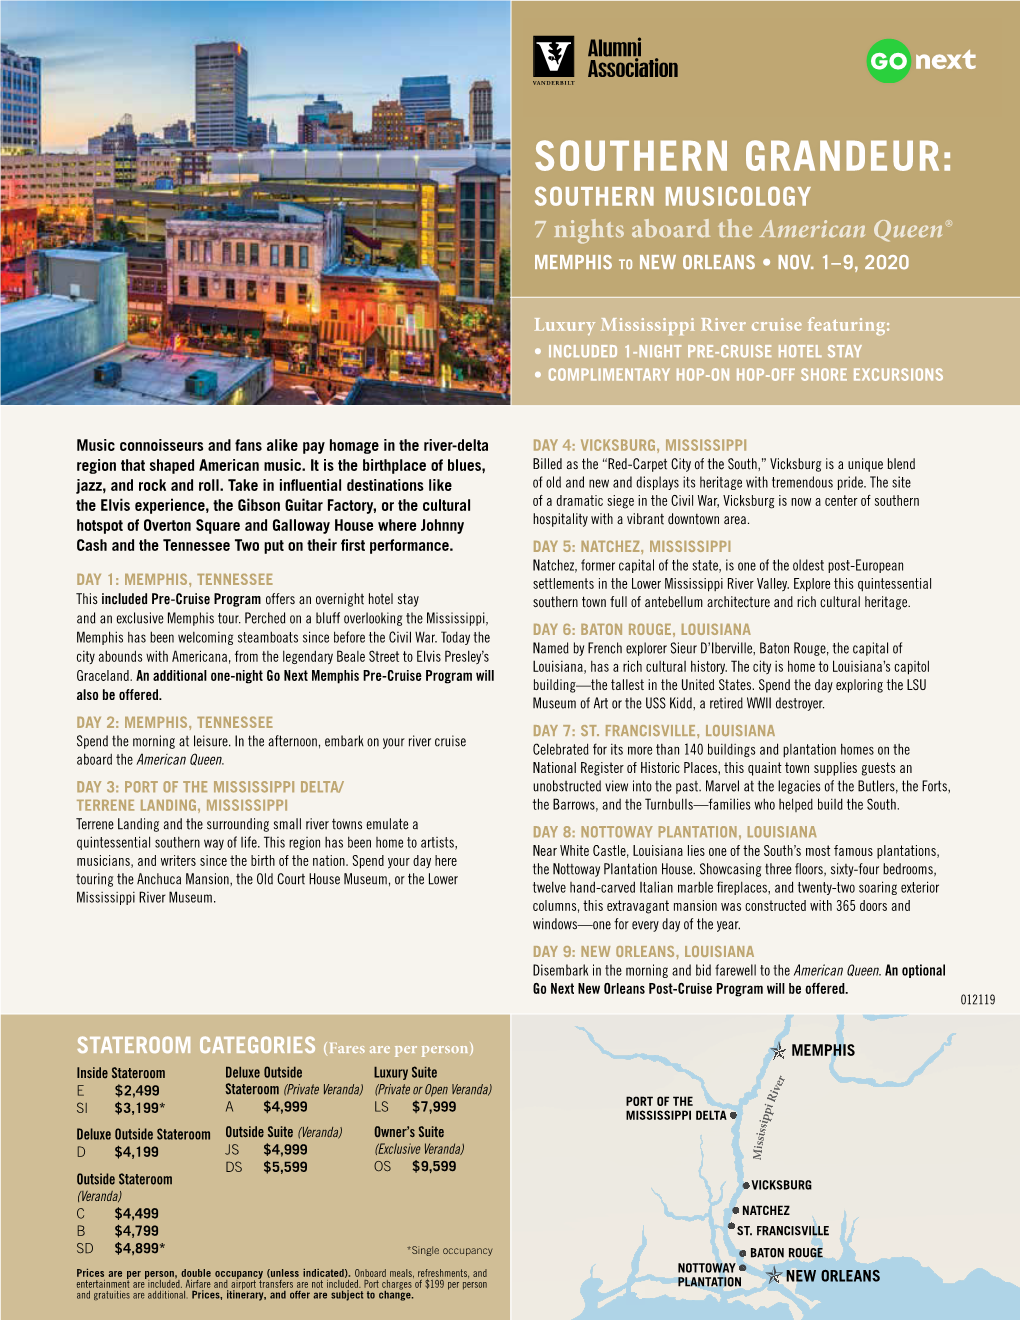 SOUTHERN GRANDEUR: SOUTHERN MUSICOLOGY 7 Nights Aboard the American Queen® MEMPHIS to NEW ORLEANS • NOV